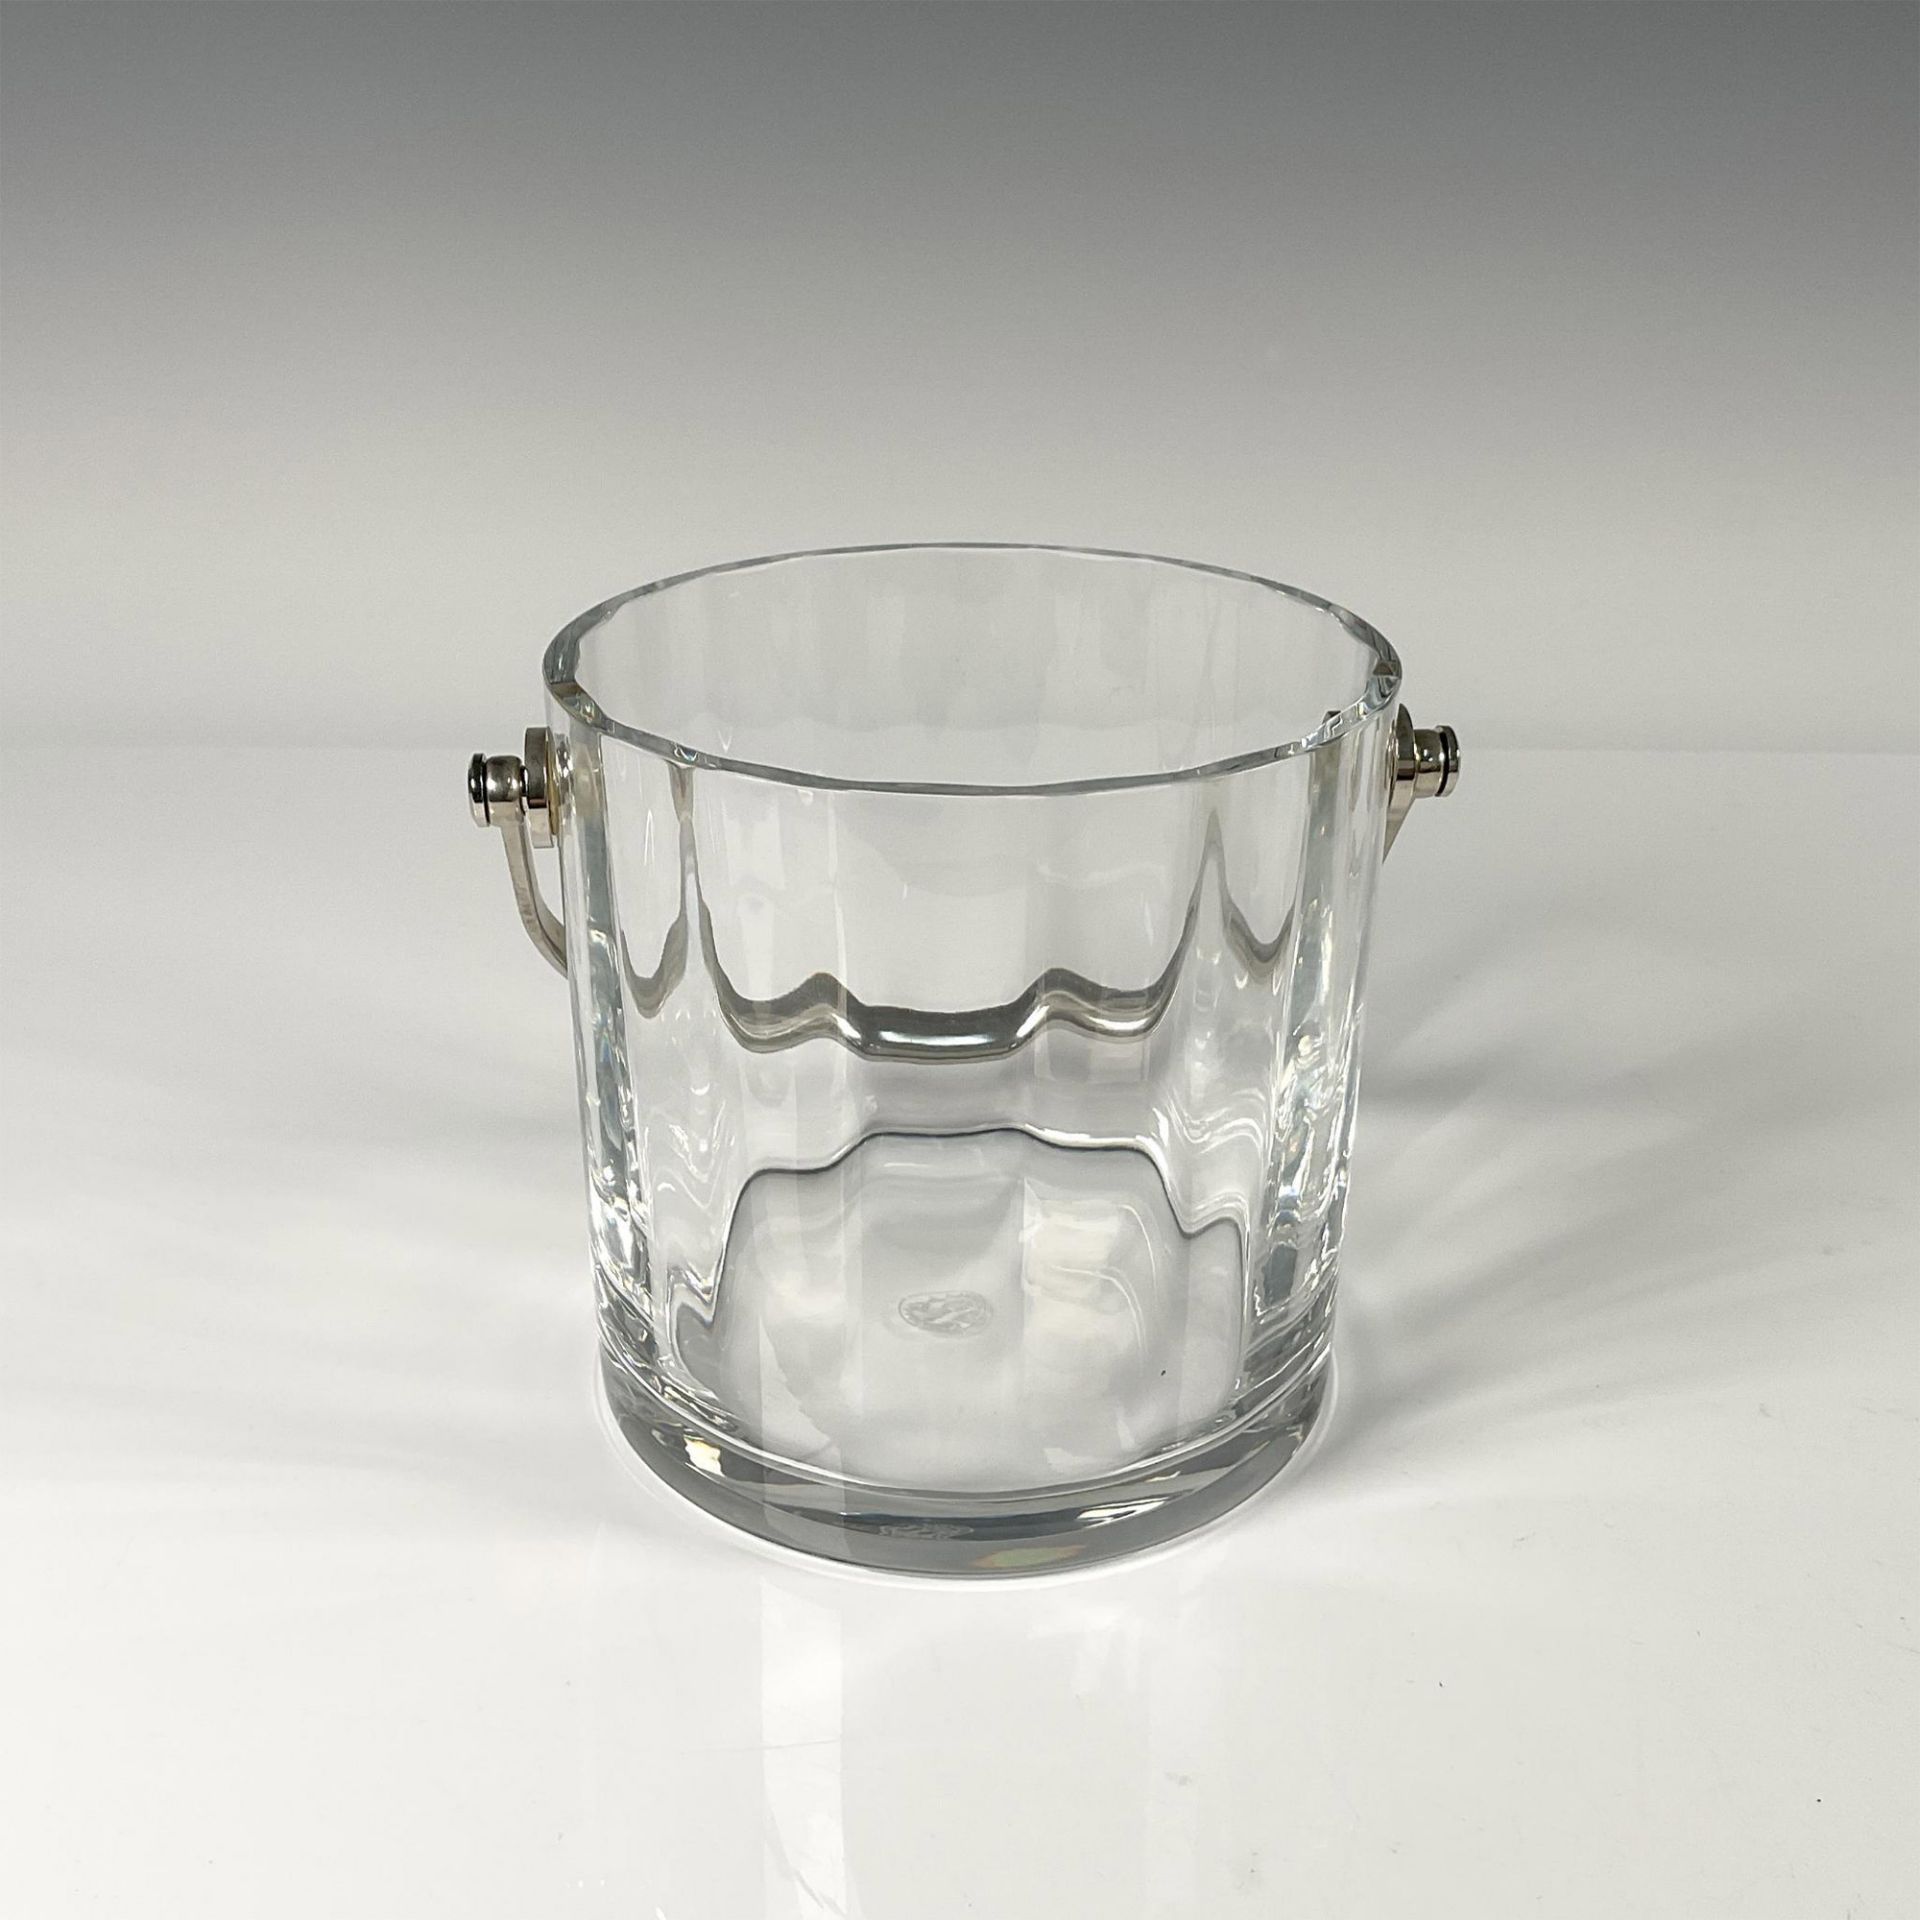 Baccarat Crystal Ice Bucket with Silver Handle - Image 2 of 4